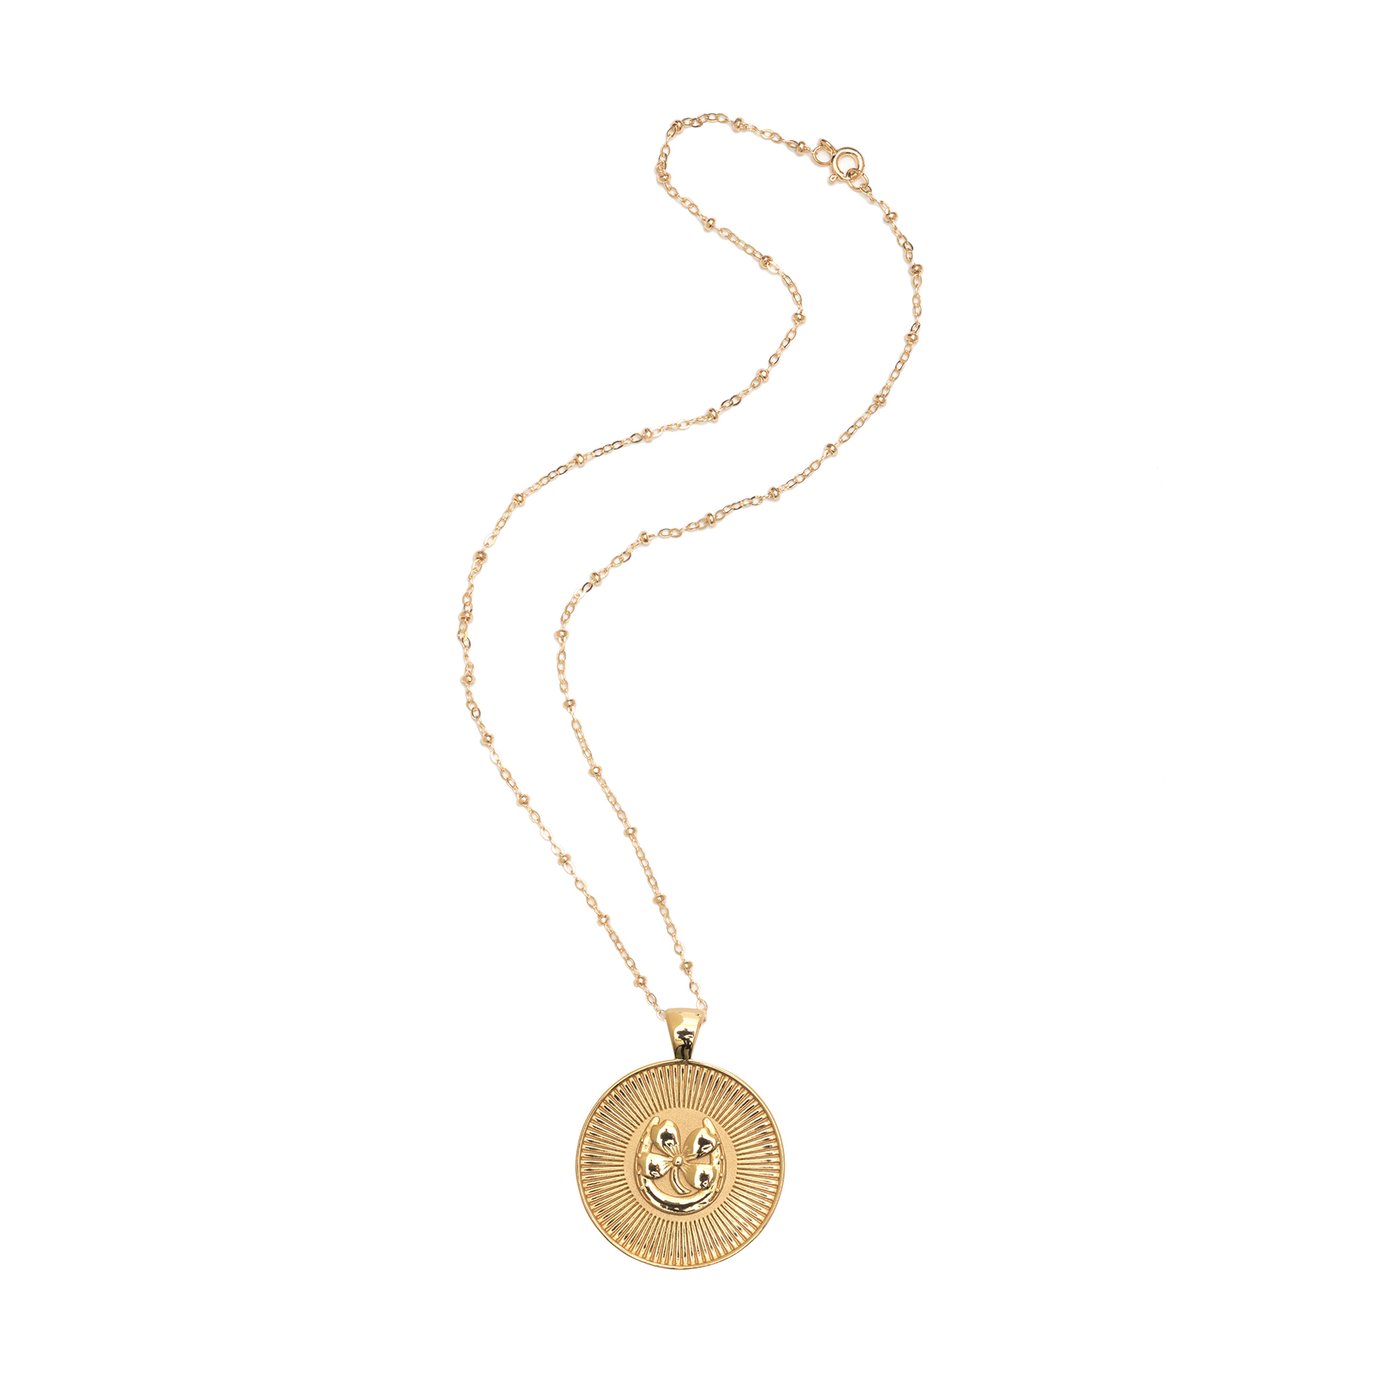 Double Sided Lucky Medallion. The Lucky Charm Necklace. Chain